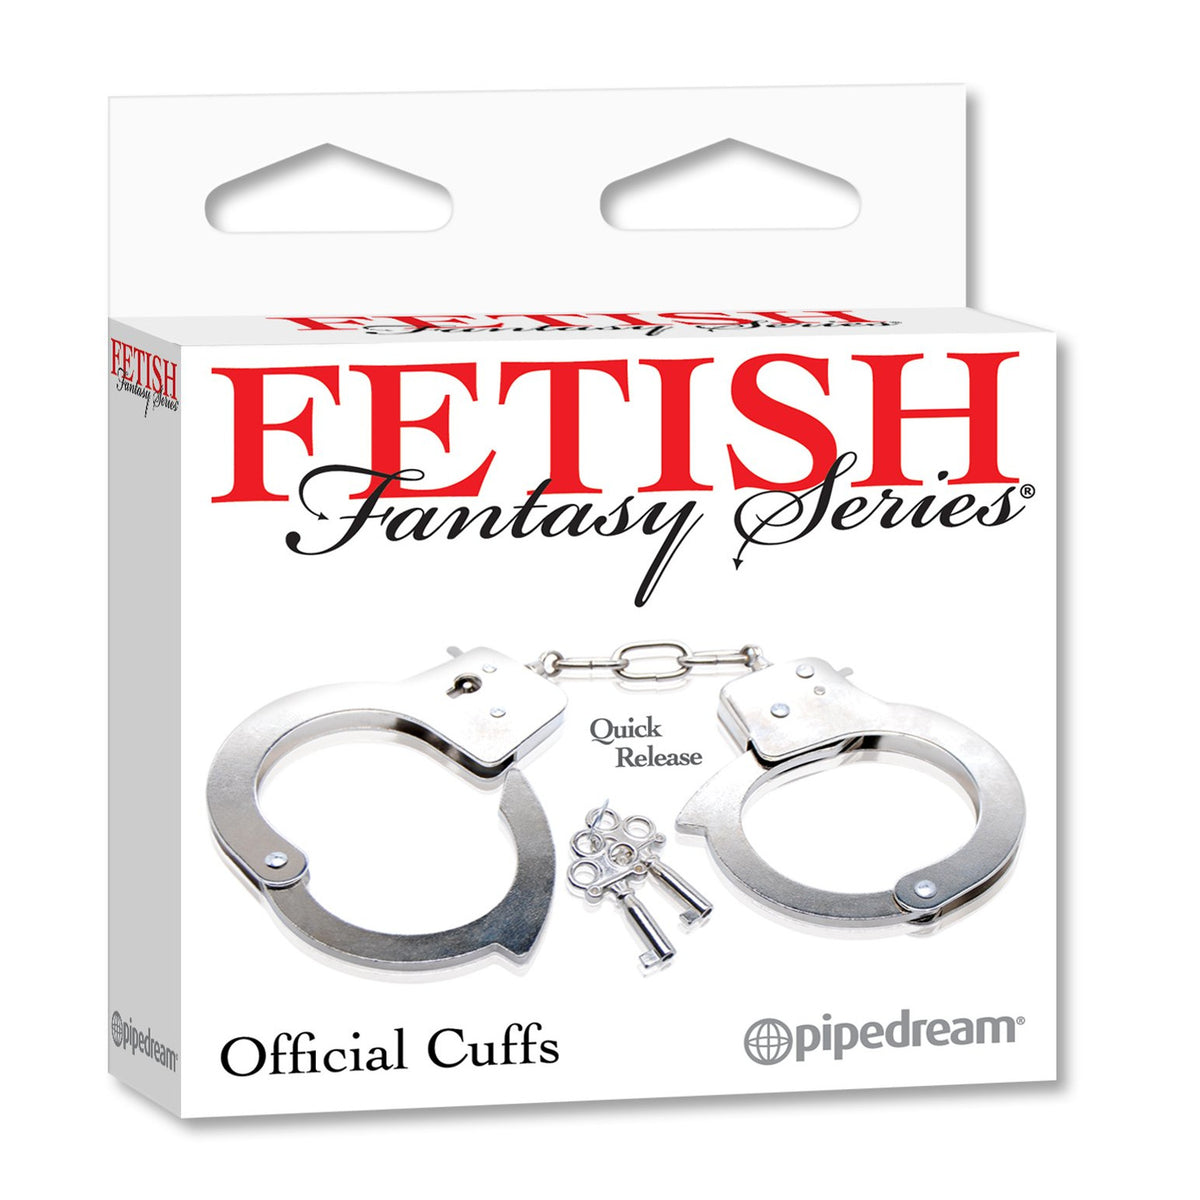 Pipedream Products Fetish Fantasy Official Handcuffs - Metal